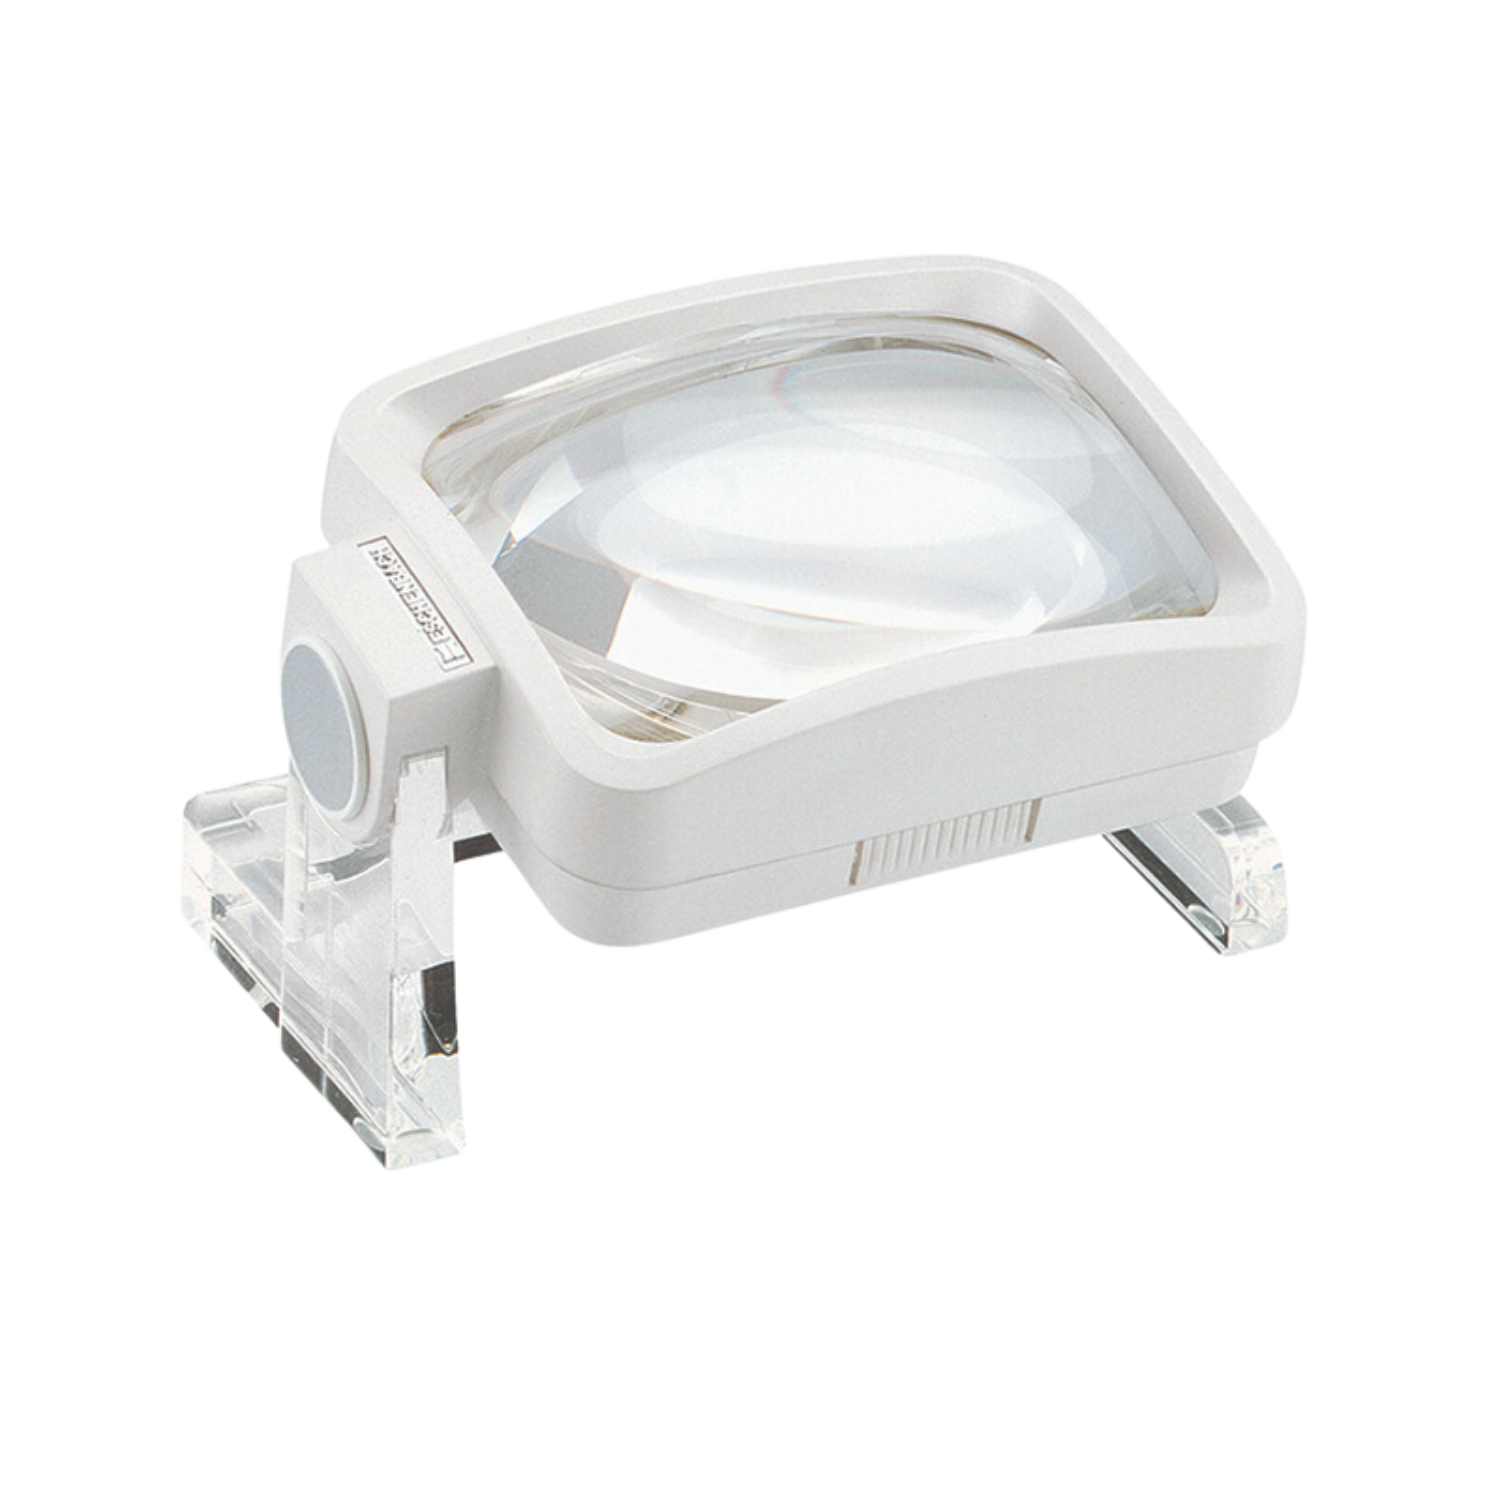 Image of the Visomax 4x2" aspheric stand magnifier from Eschenbach.